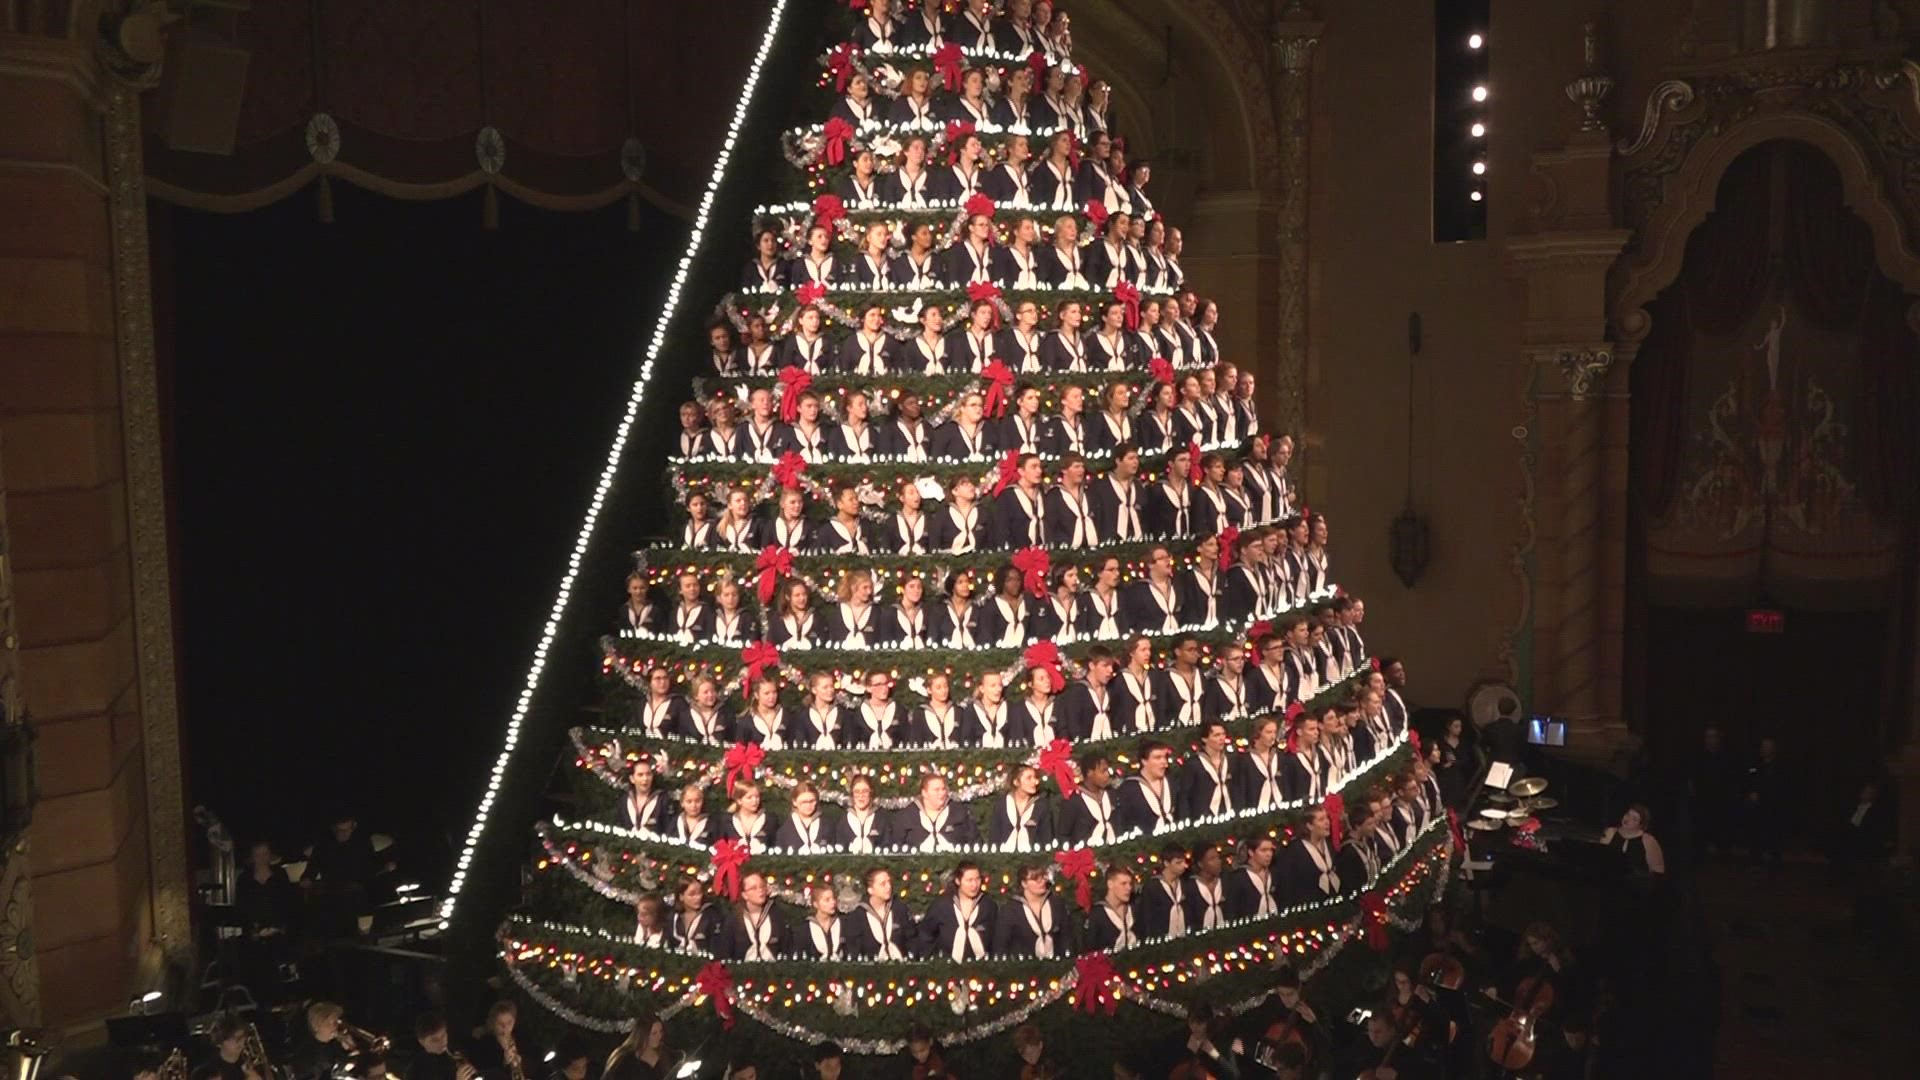 The pandemic forced the Mona Shores Singing Christmas Tree to cancel its 2020 event for the first time since 1985. It's returning in 2021 with 5 performances.